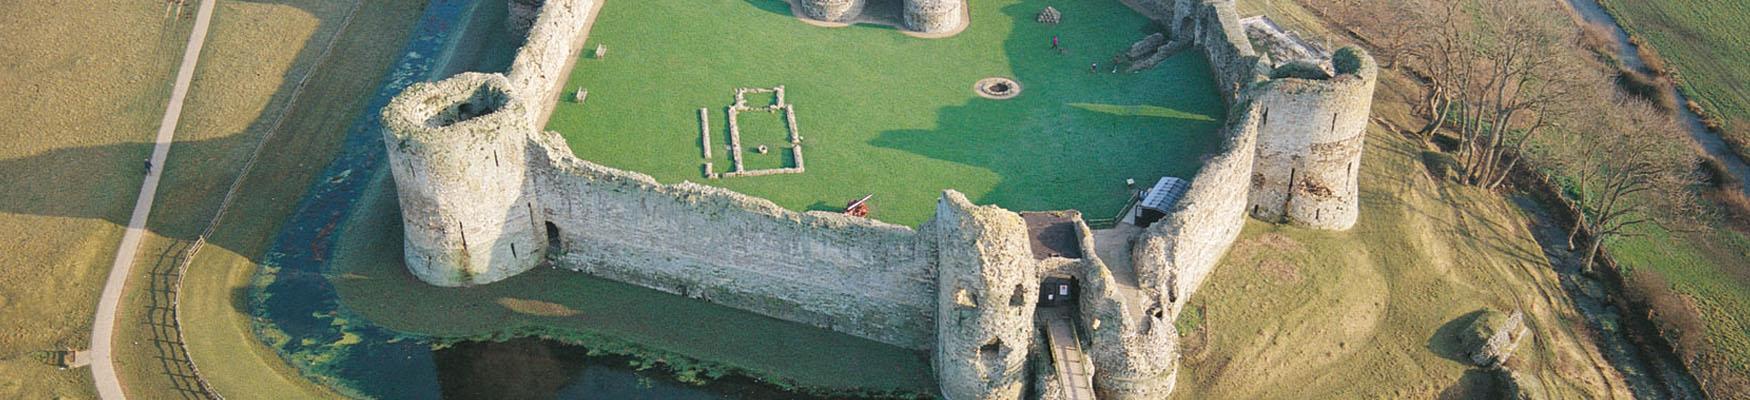 Pevensey Castle from above